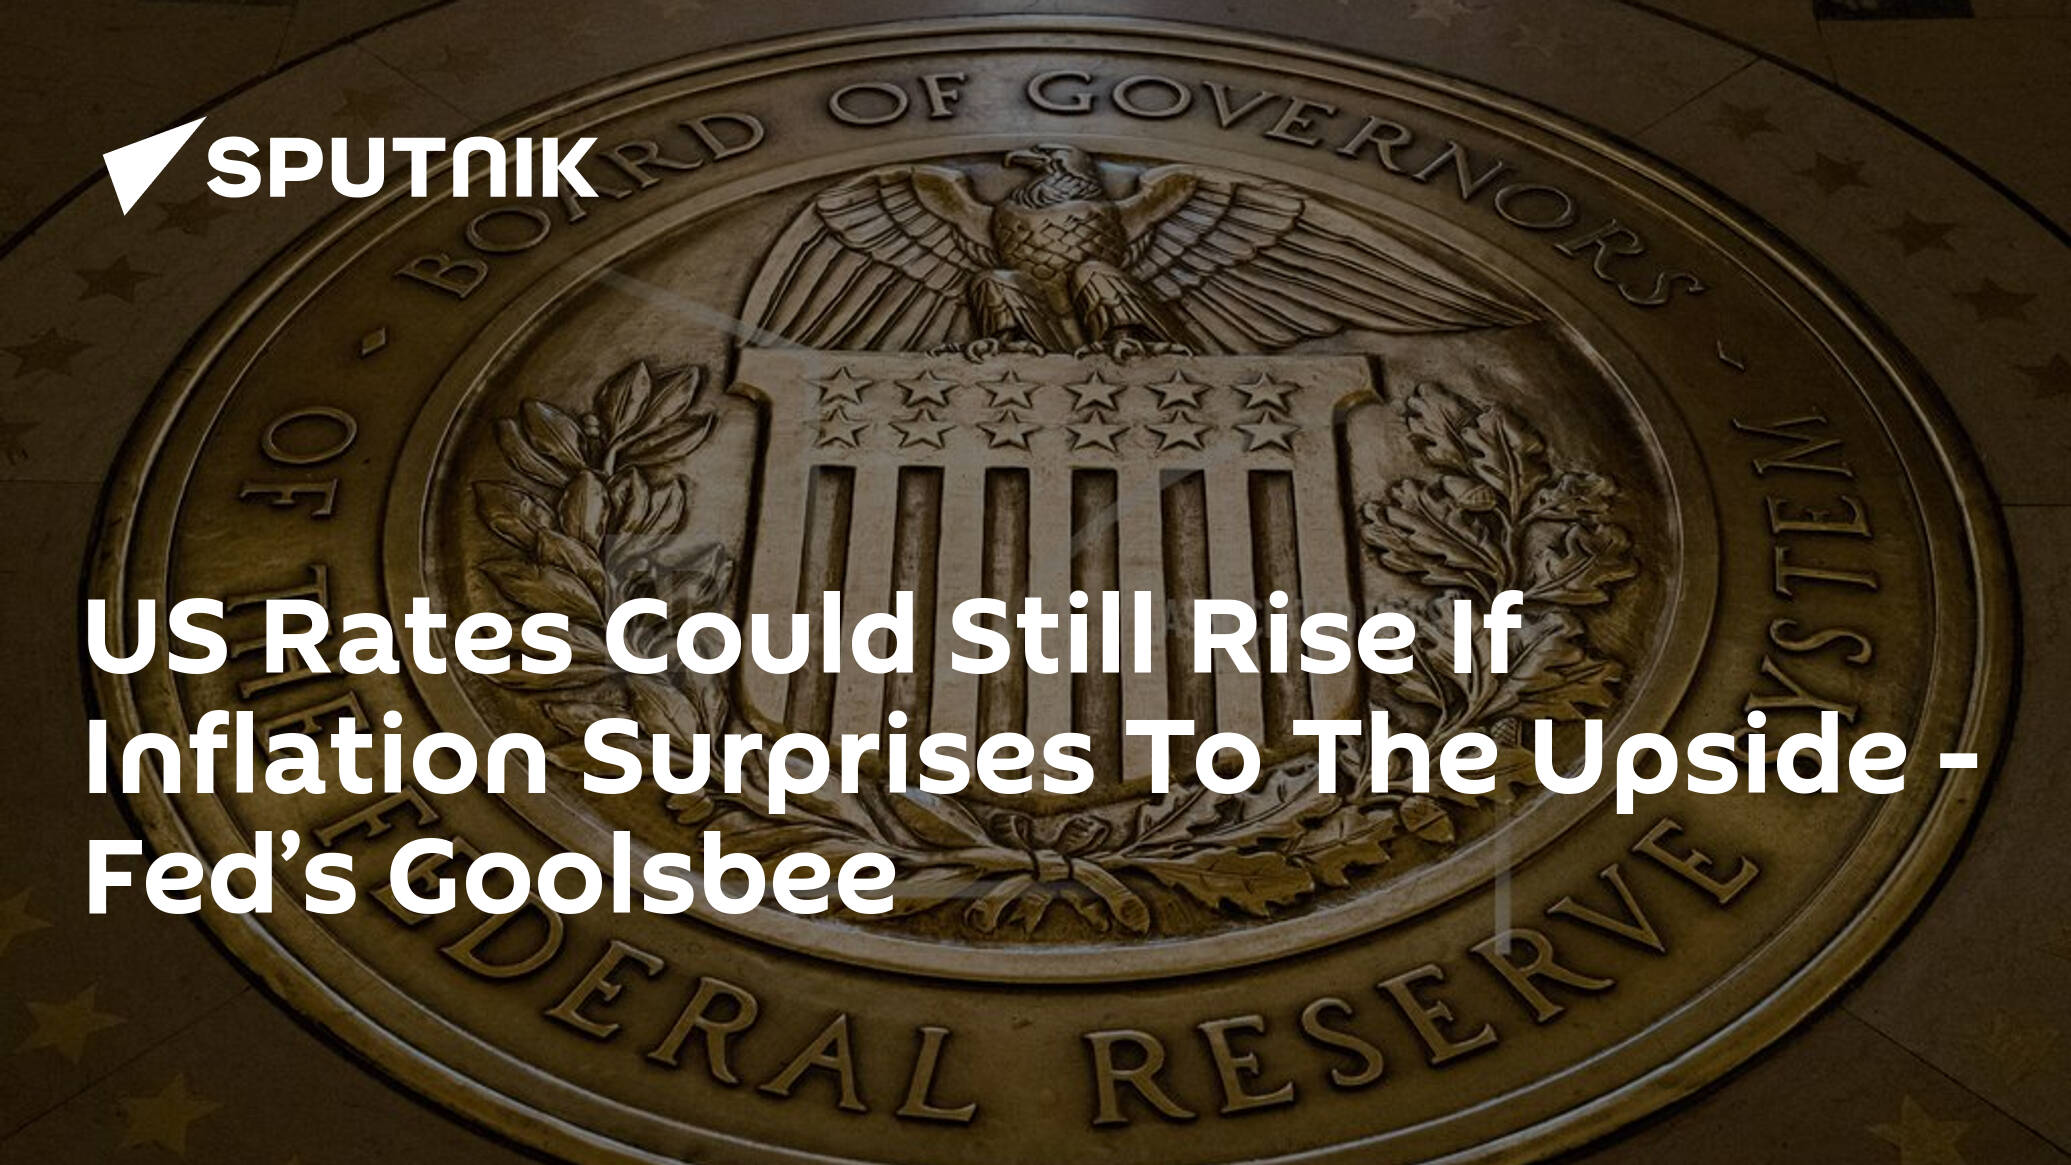 US Rates Could Still Rise If Inflation Surprises To The Upside – Fed’s Goolsbee